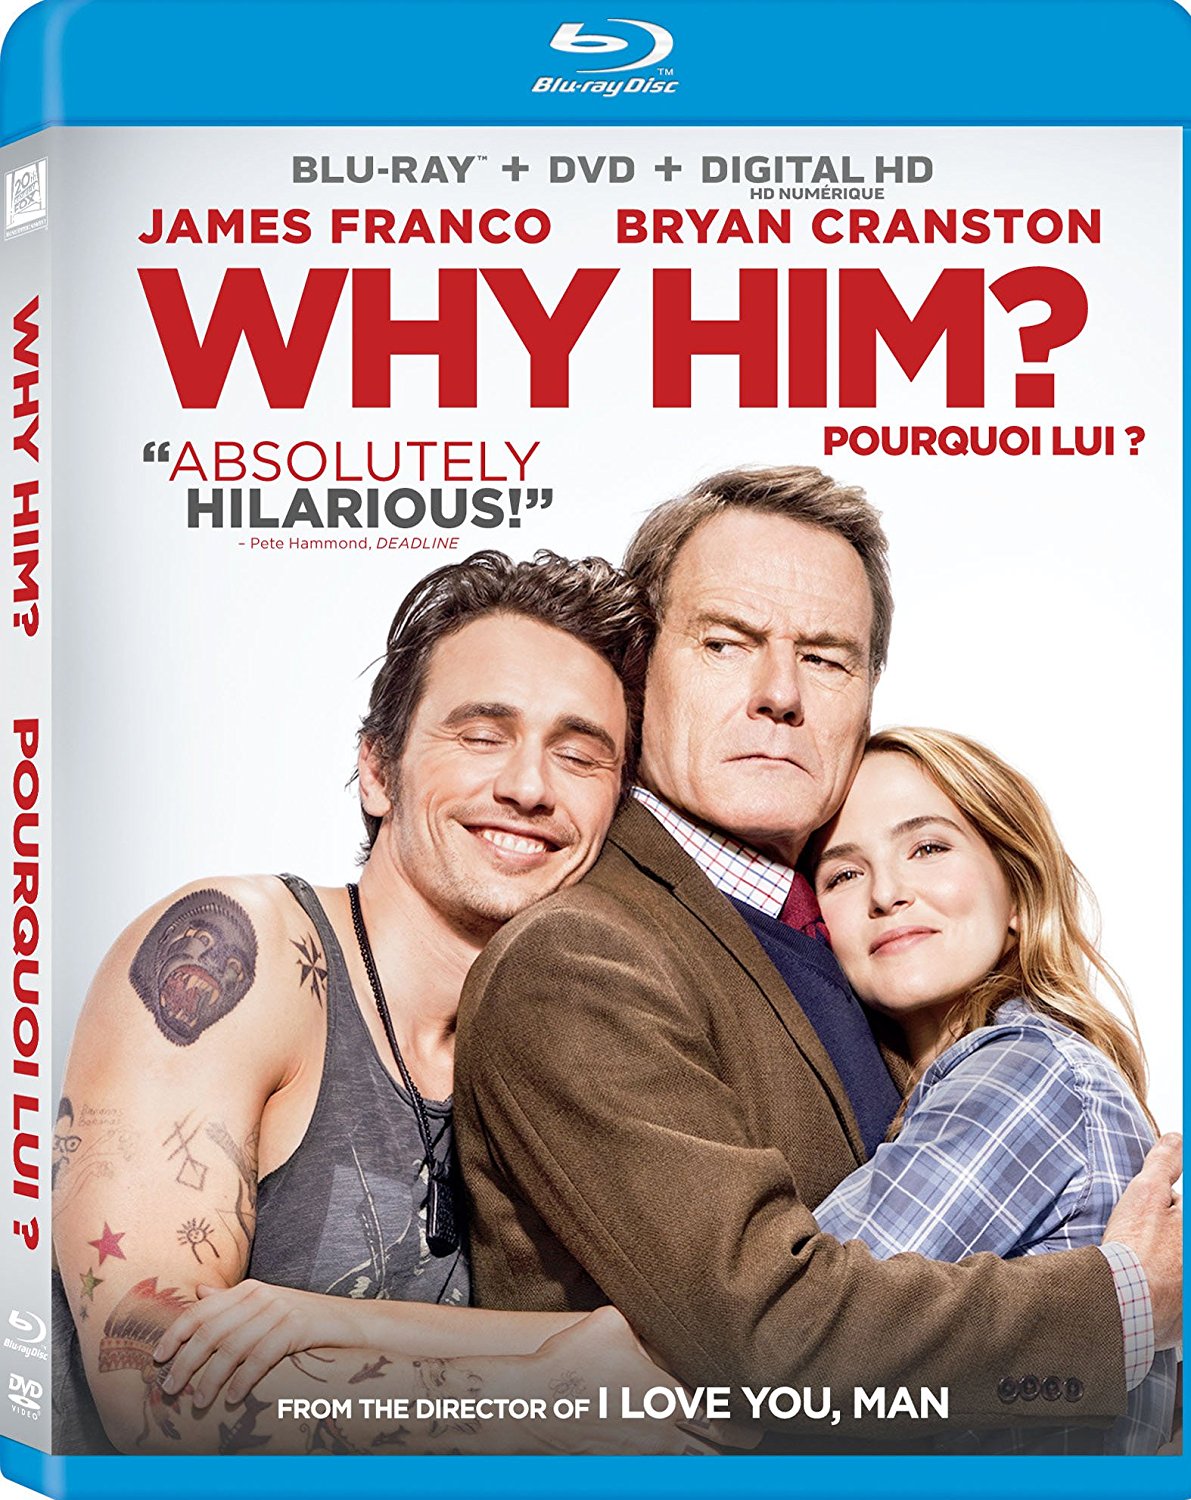 Why Him? new on DVD